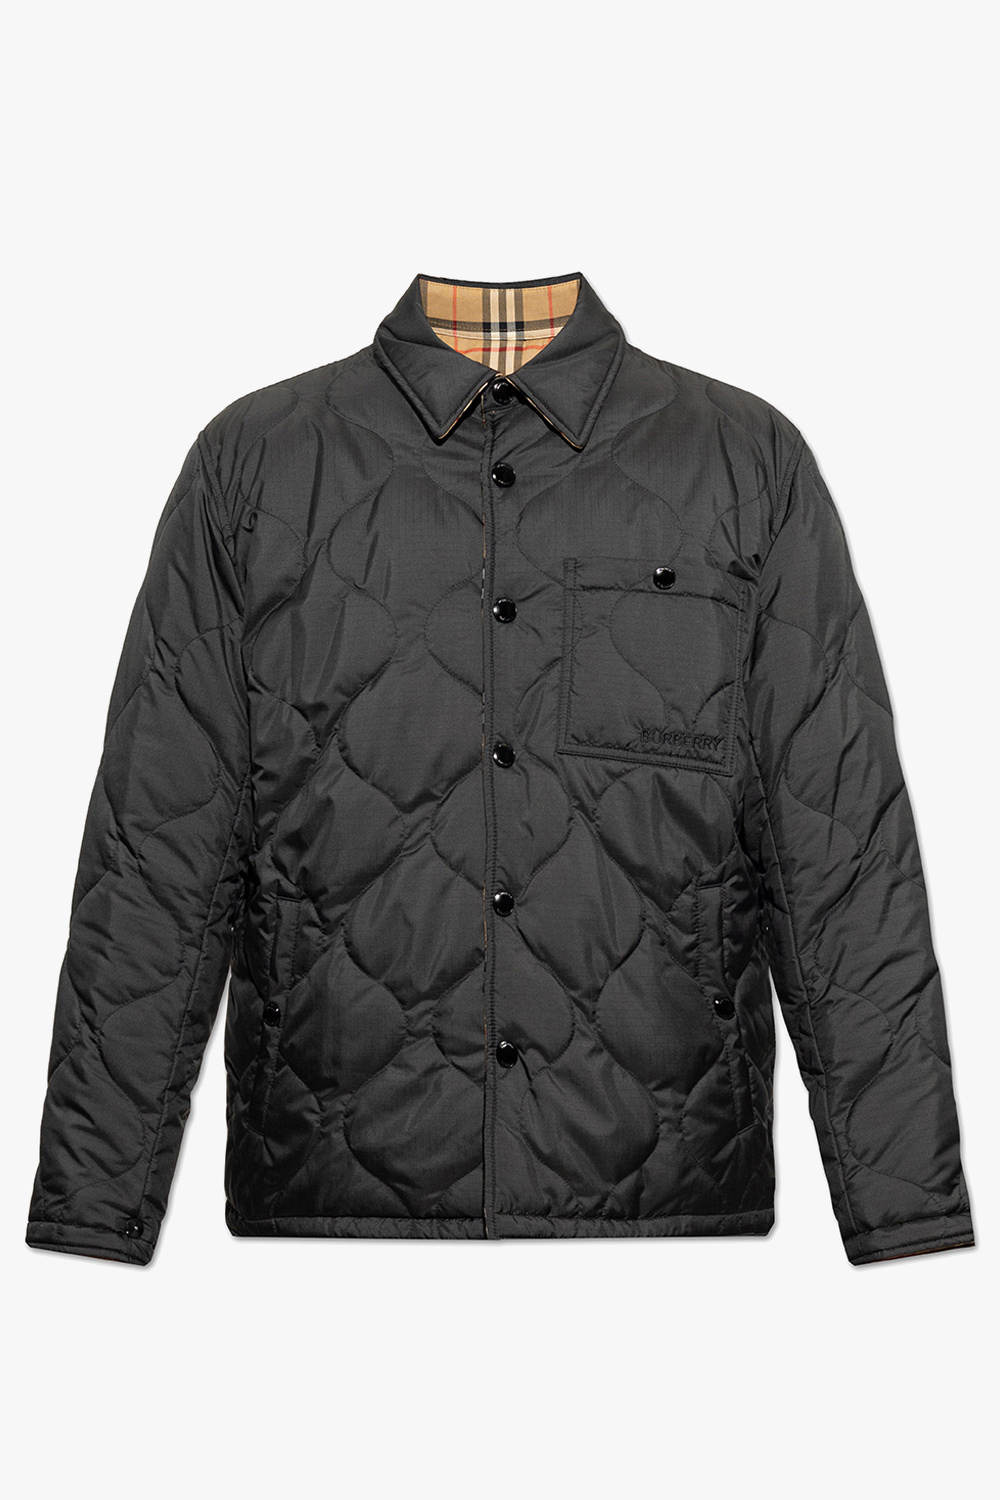 Black ‘Francis’ quilted jacket Burberry - Vitkac GB